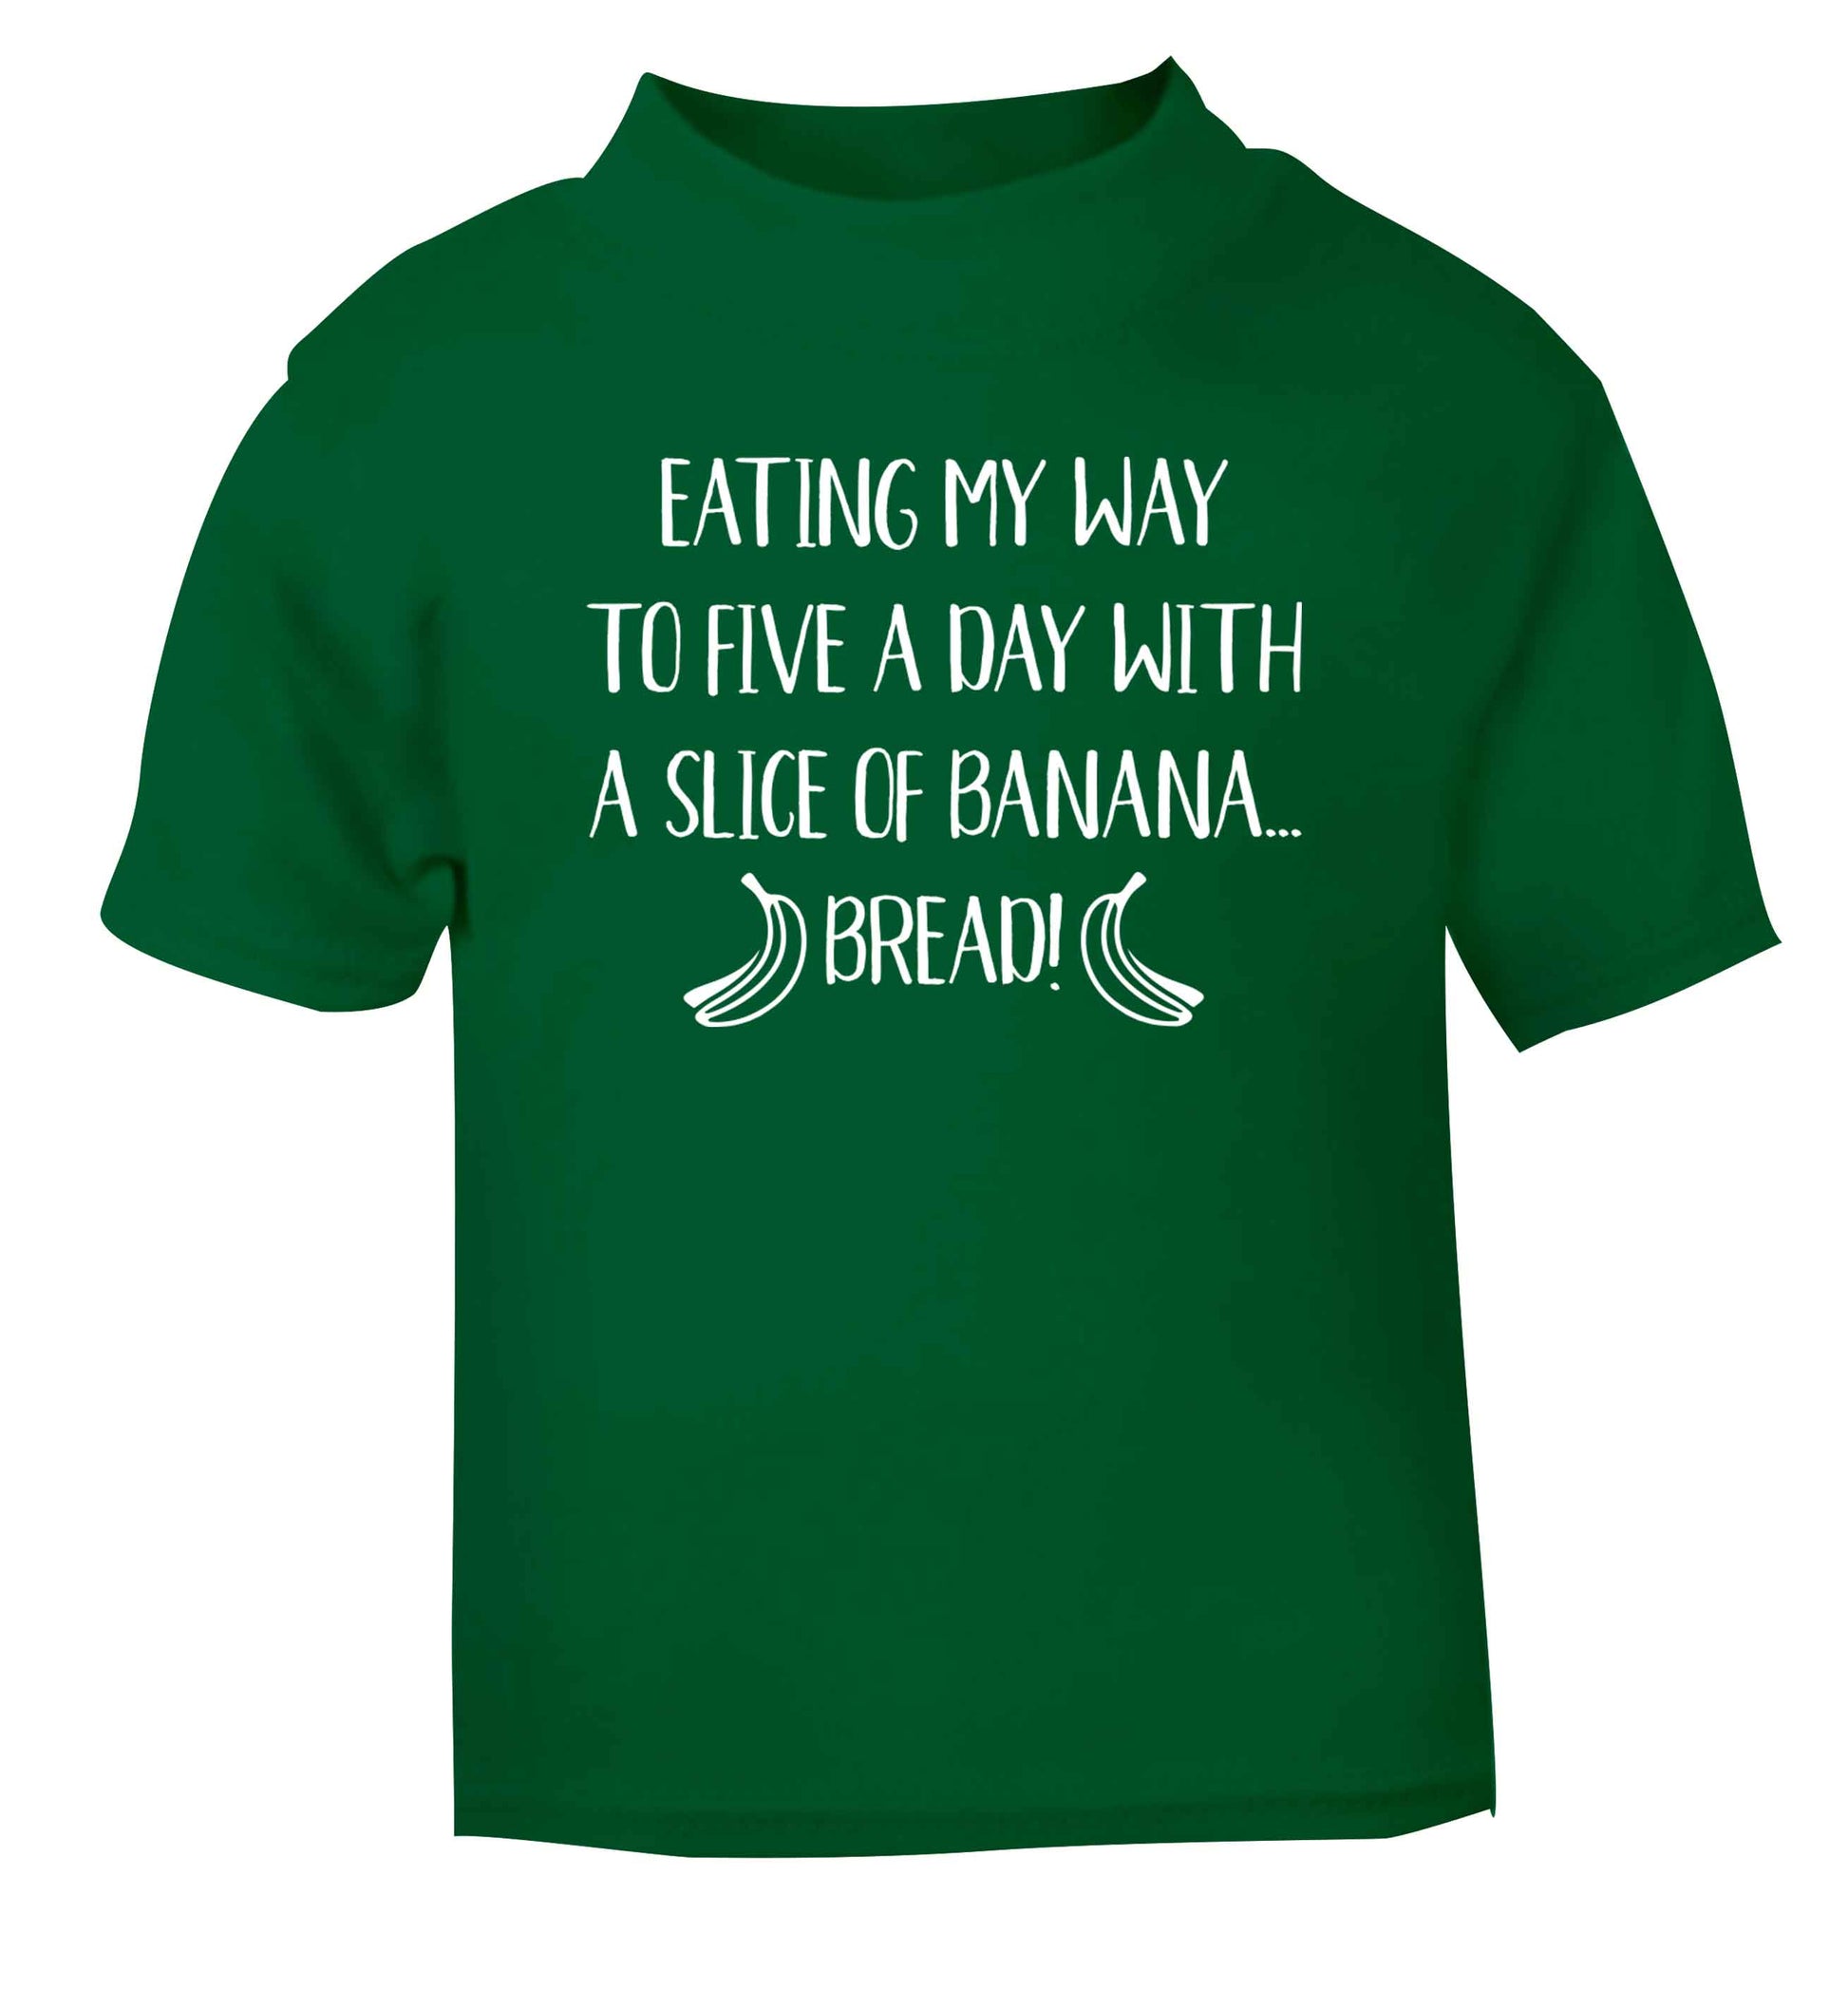 Eating my way to five a day with a slice of banana bread green Baby Toddler Tshirt 2 Years